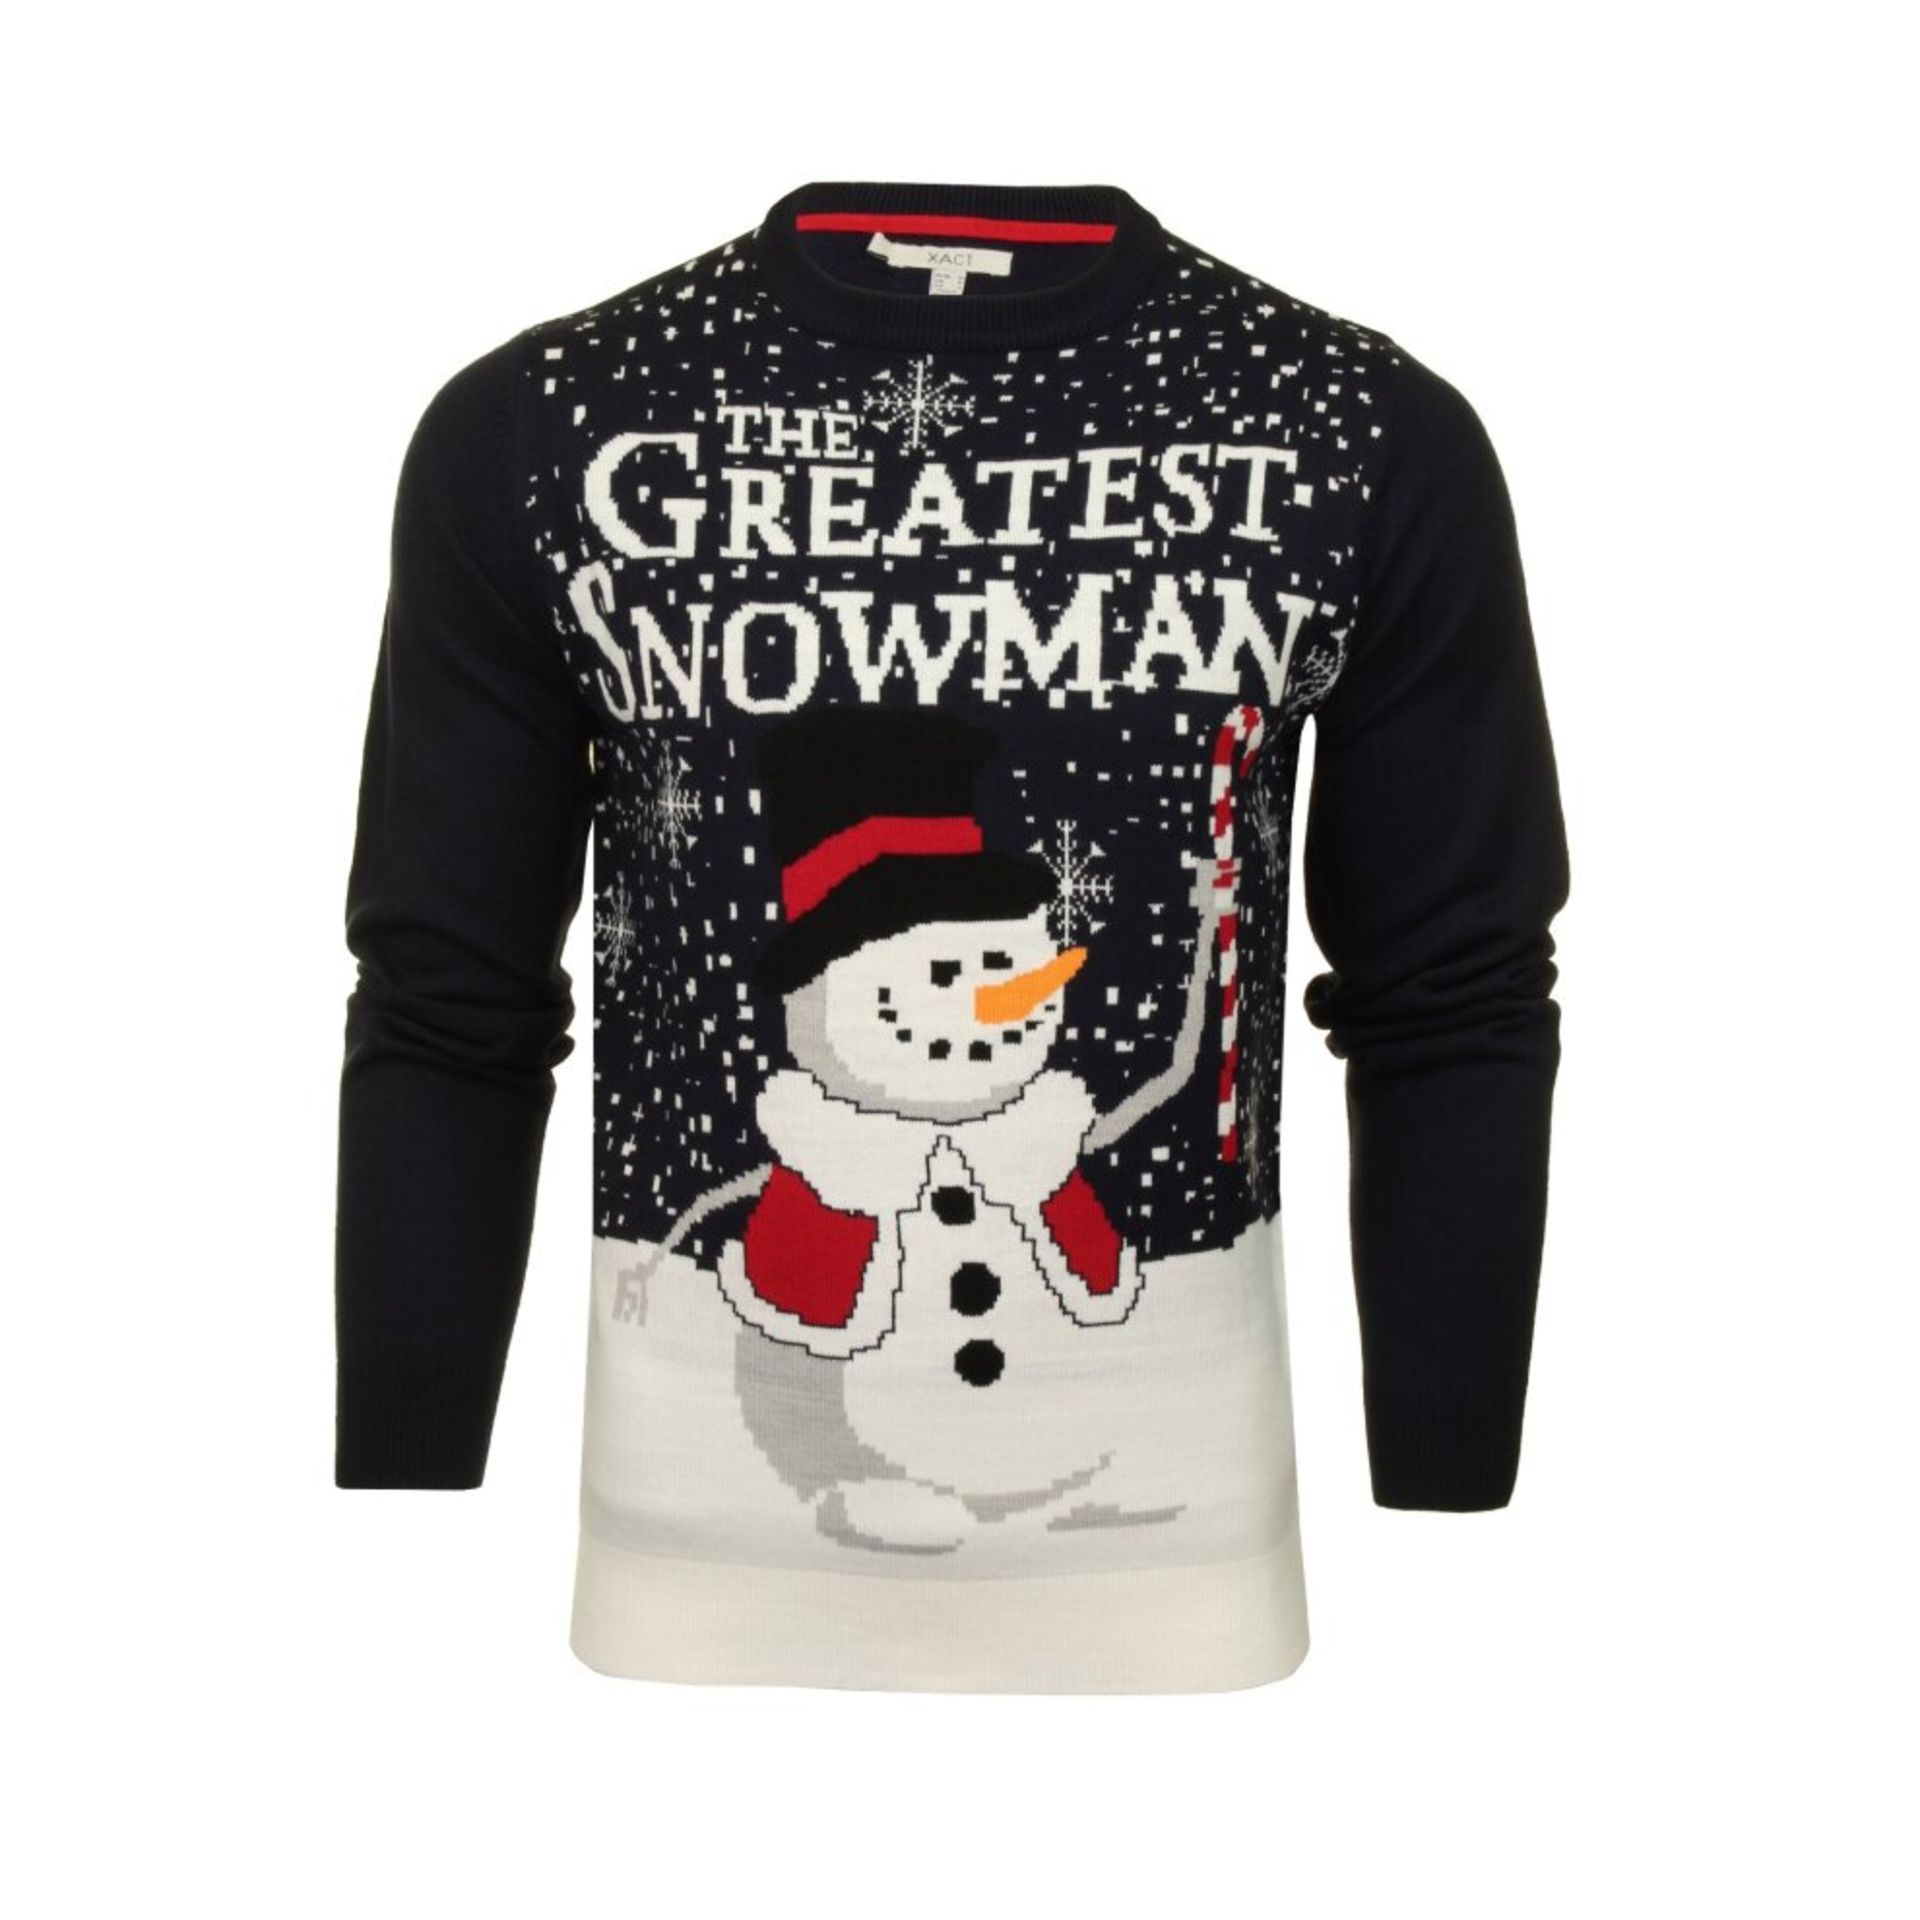 36 X BRAND NEW NOVELTY FESTIVE JUMPERS IE. THE GREATEST SNOWMAN (L-10), NAUGHTY SANTA GREY (M-5, S-